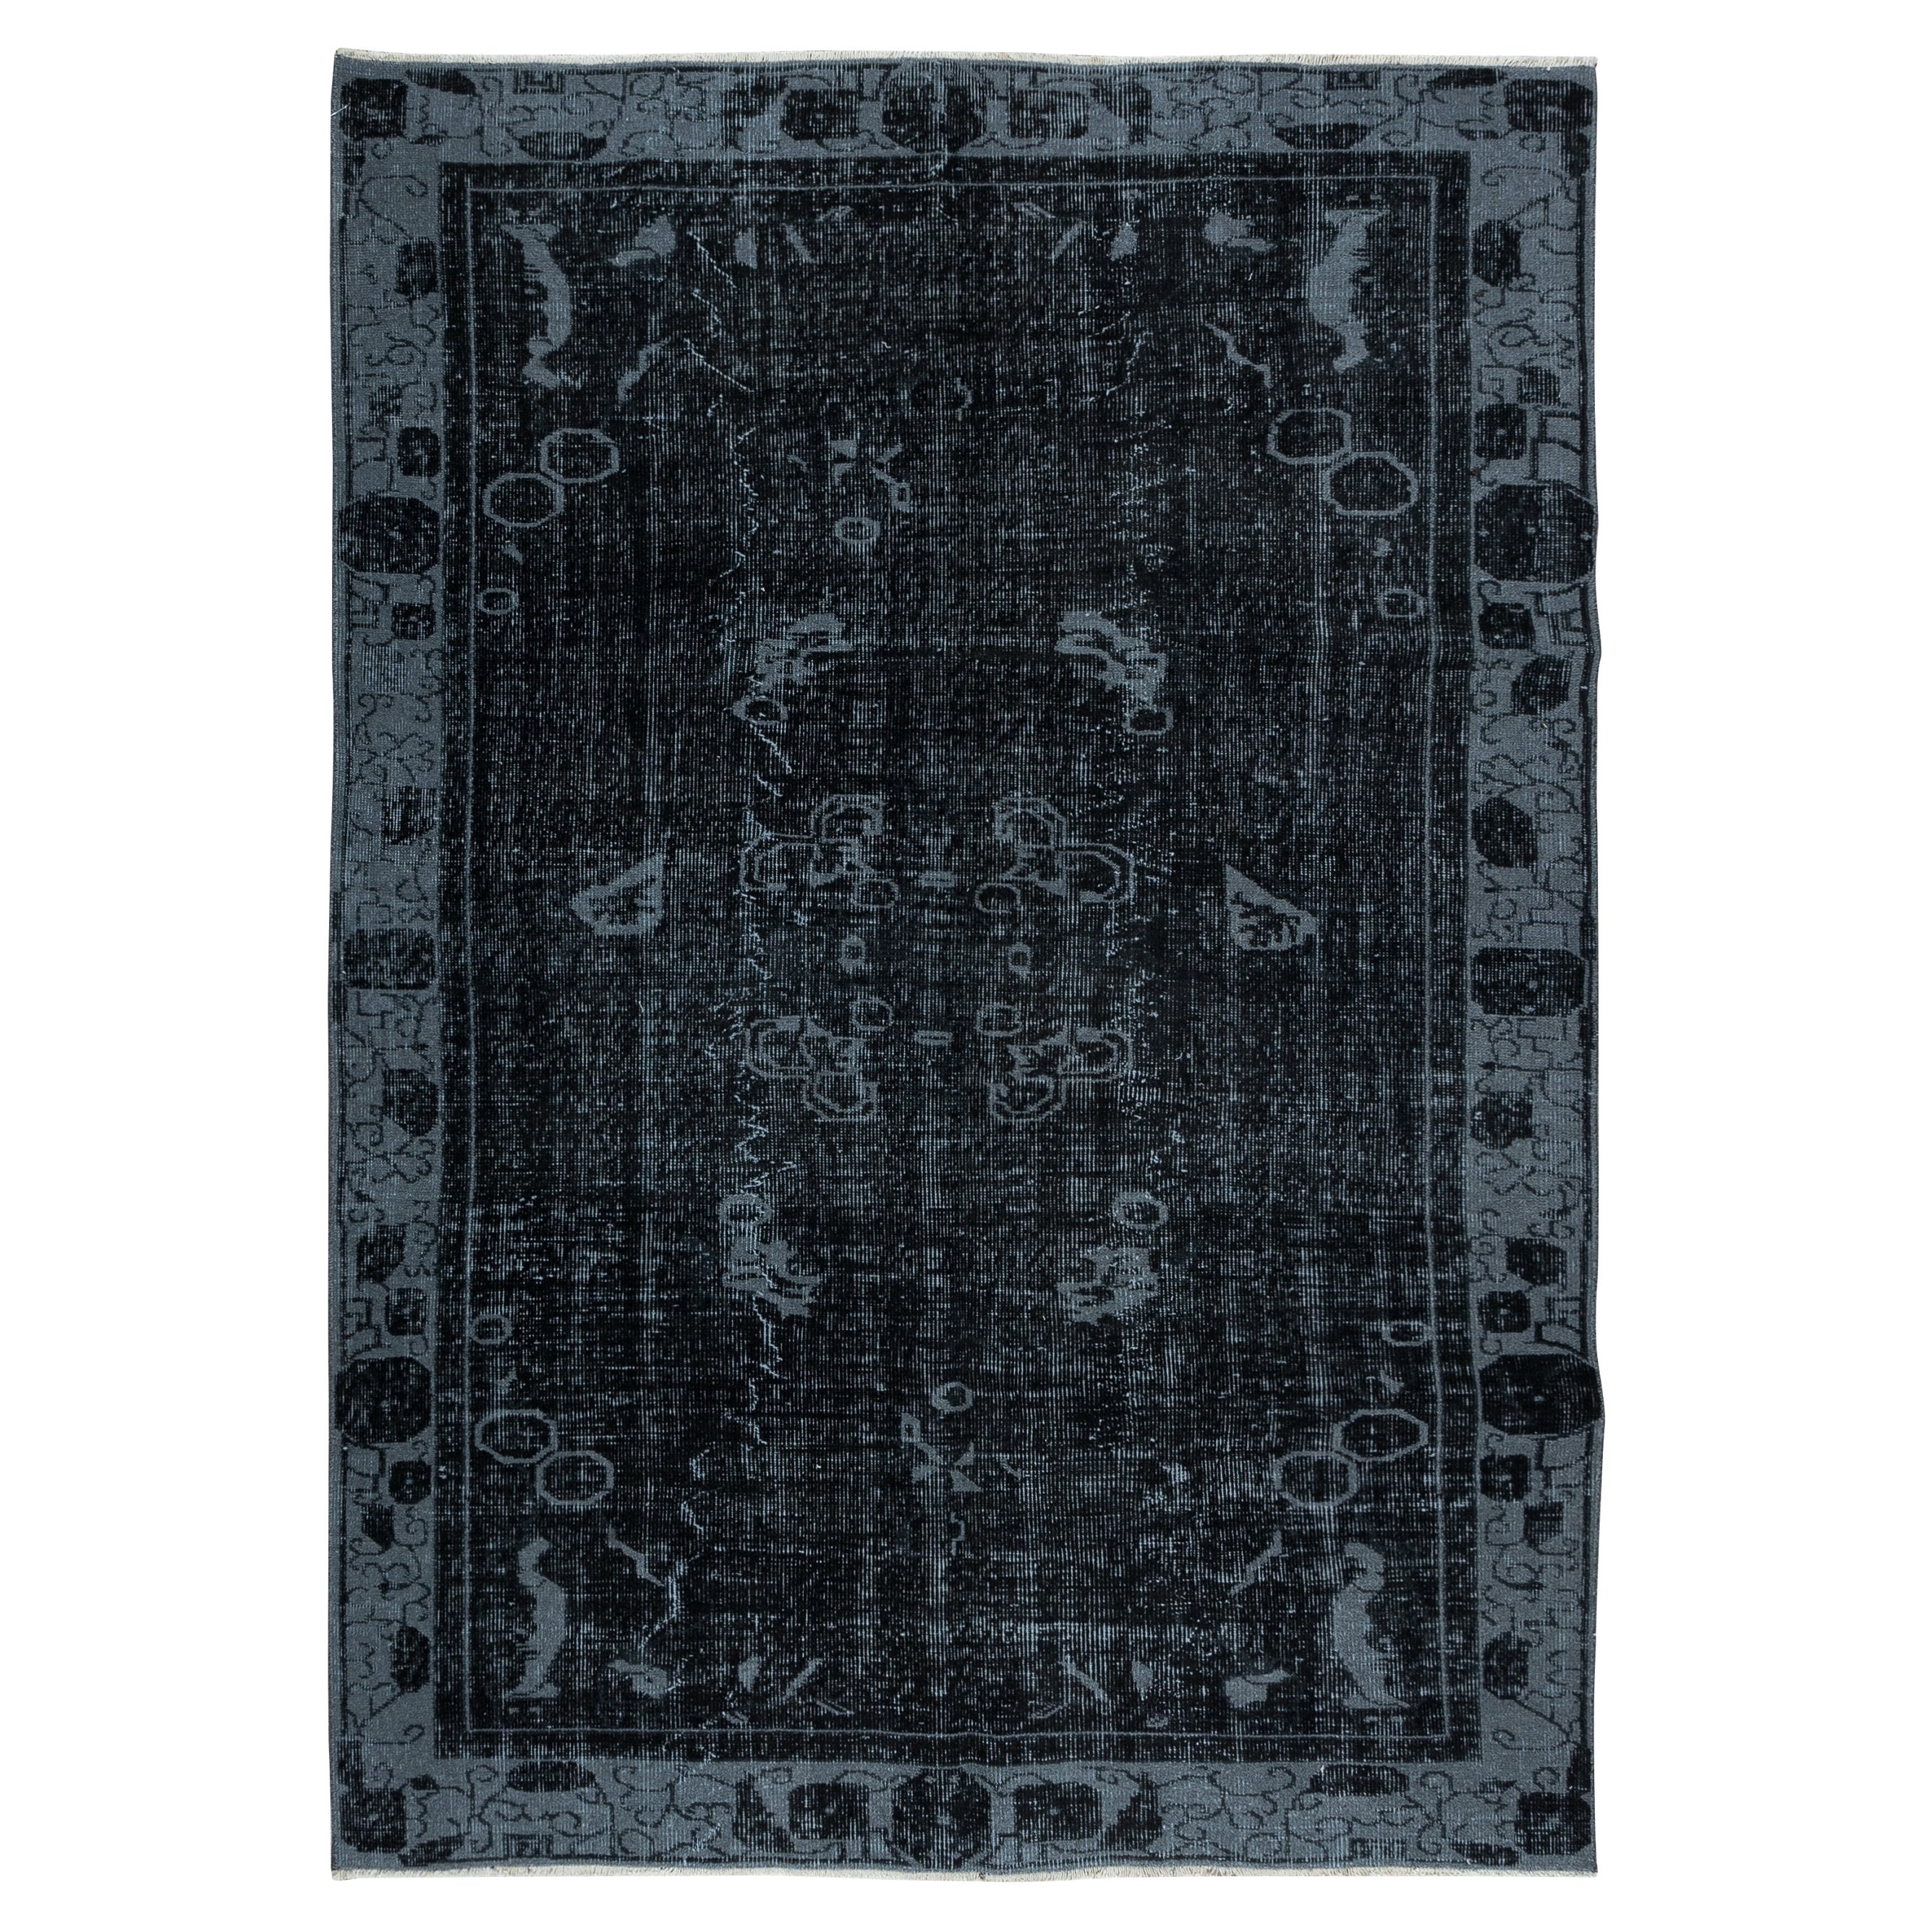 5.4x7.7 Ft Modern Black & Gray Art Deco Area Rug Hand-Knotted in Turkey For Sale